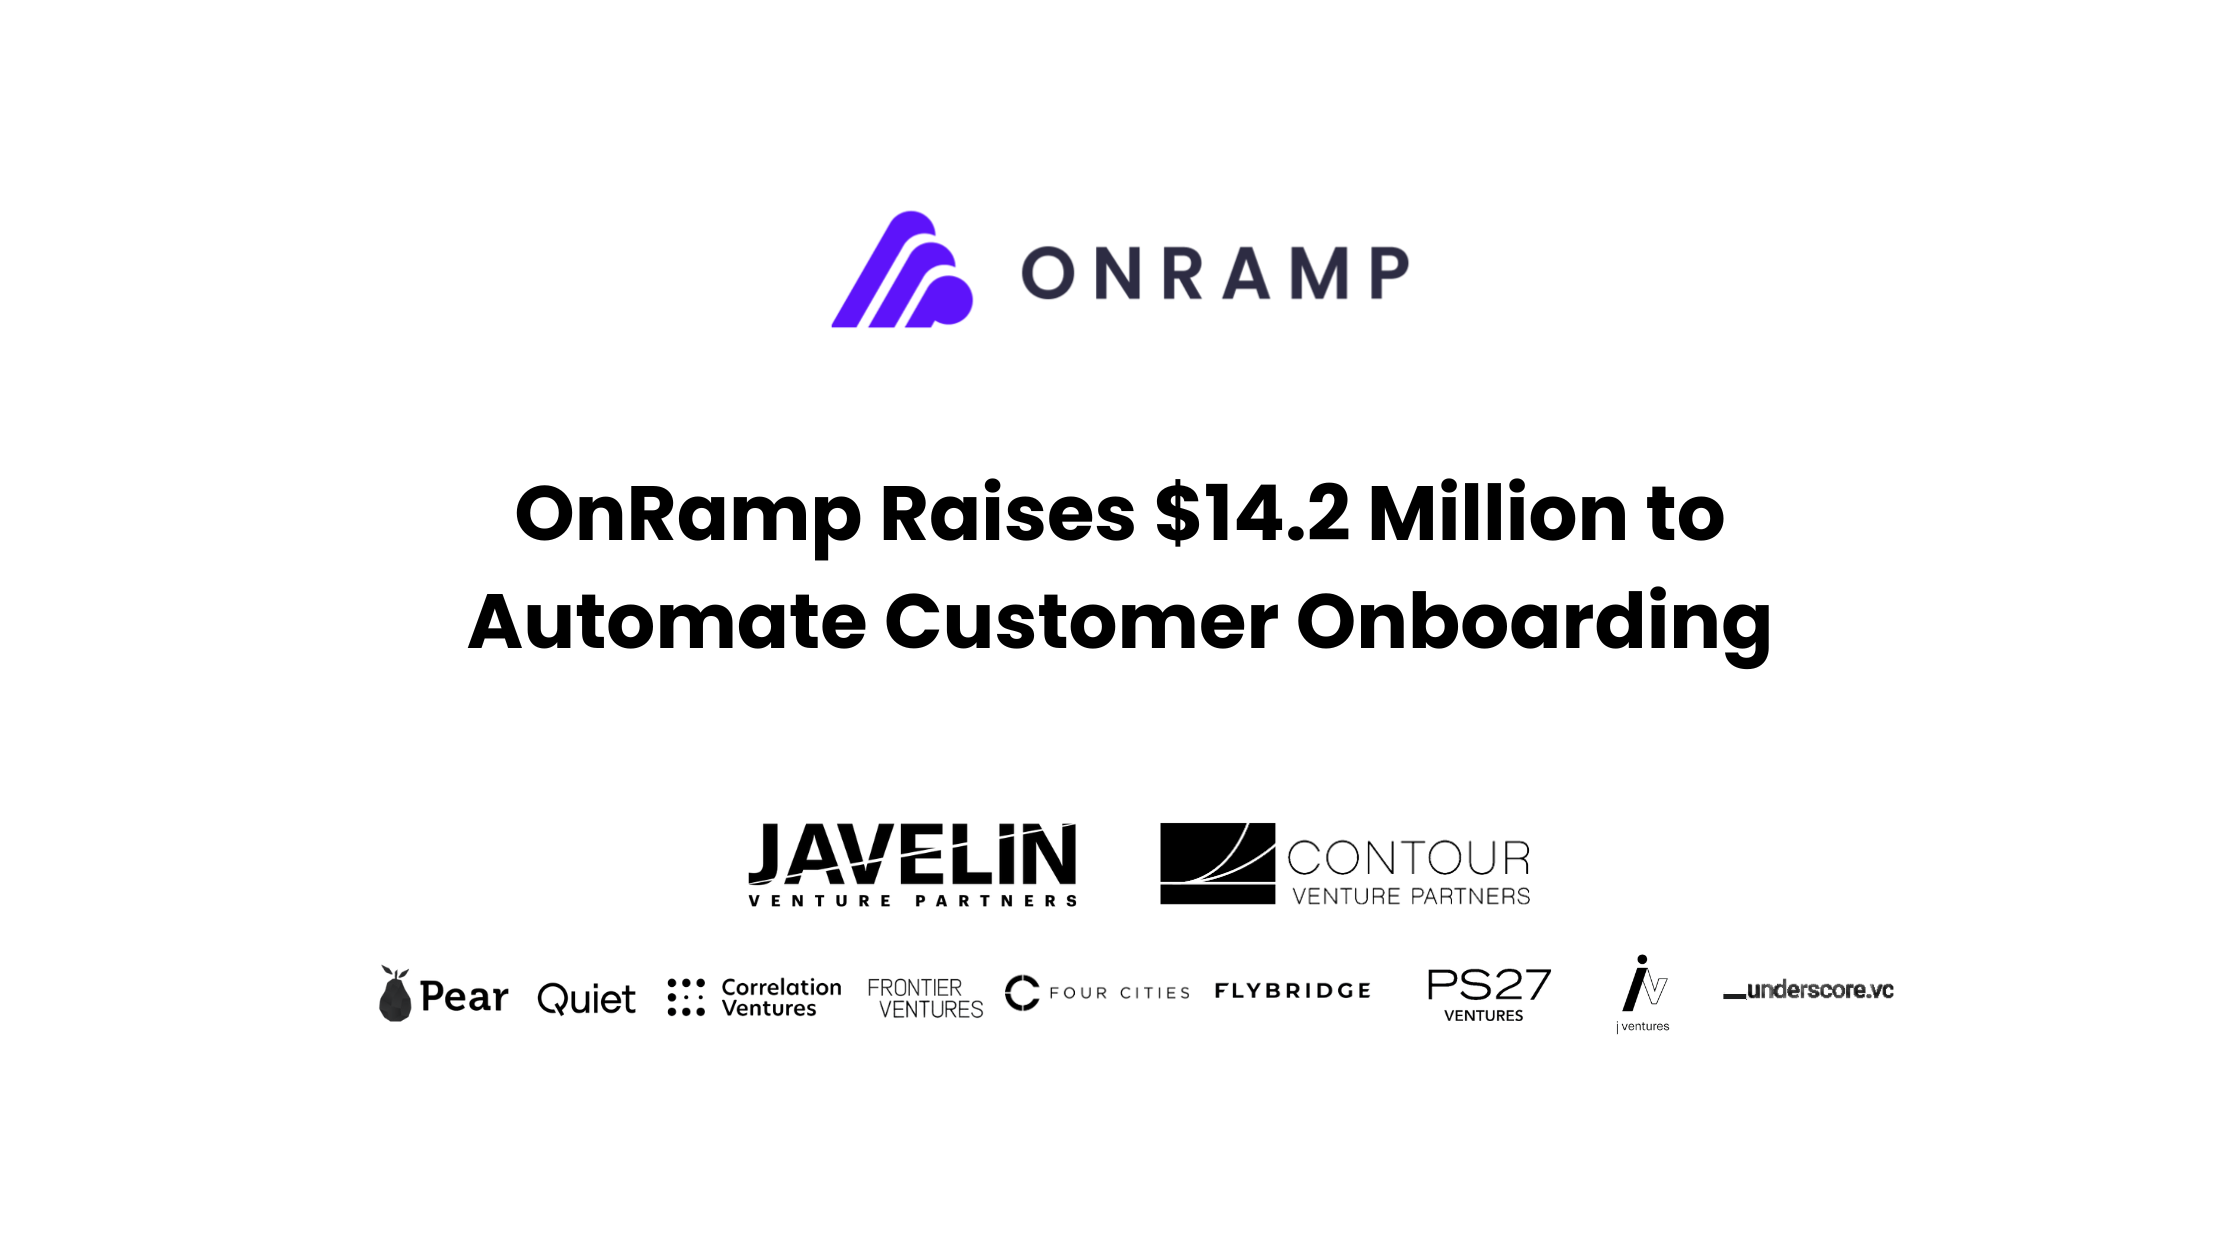 Ready to Disrupt B2B Onboarding, OnRamp Announces $14.2M in Funding